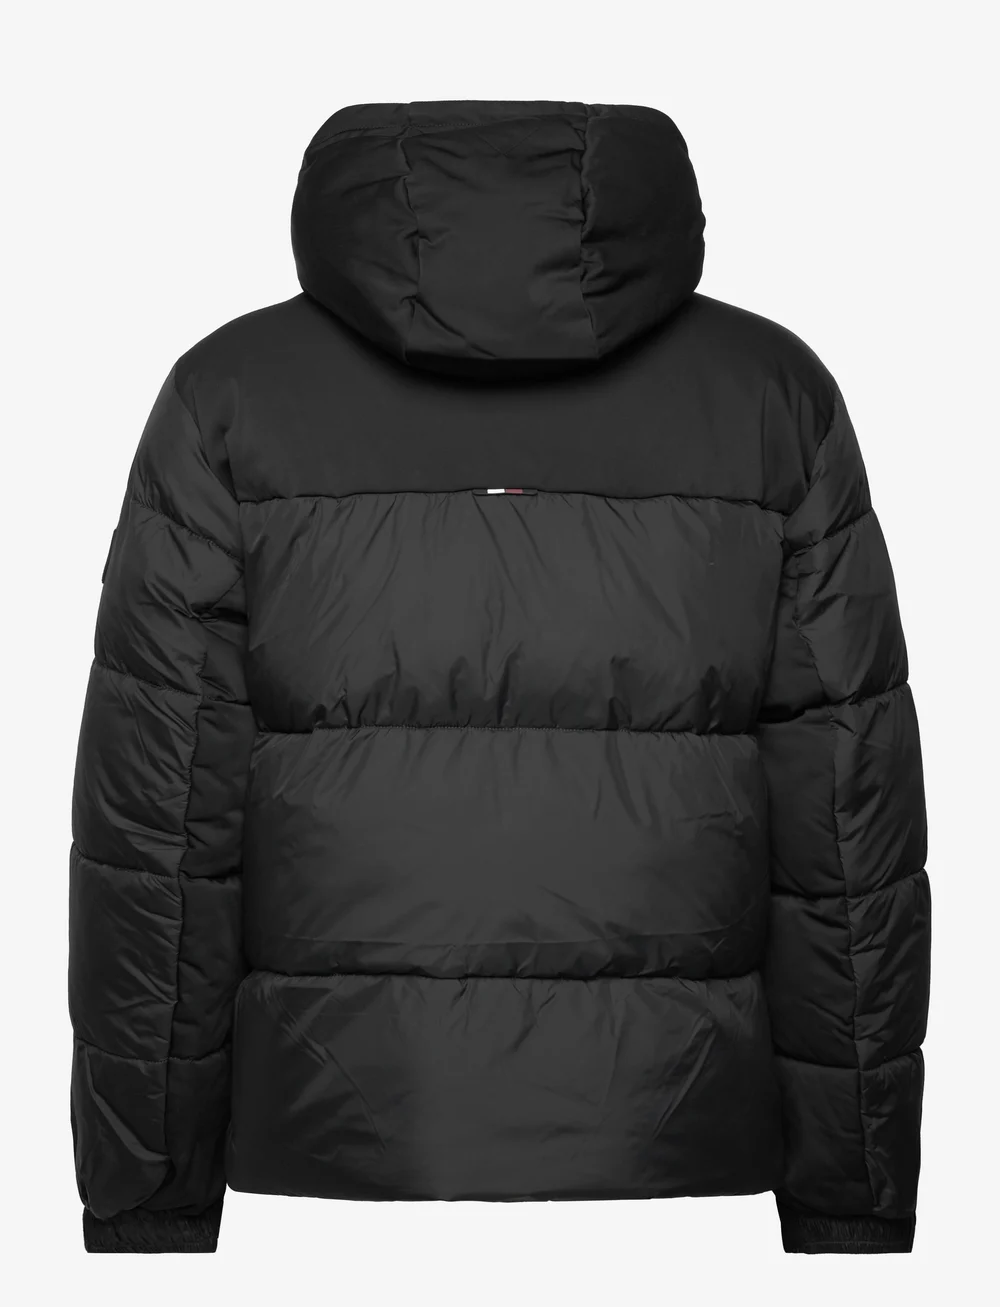 Tommy Hilfiger New York Hooded Jacket - 329.90 €. Buy Padded jackets from Tommy  Hilfiger online at Boozt.com. Fast delivery and easy returns